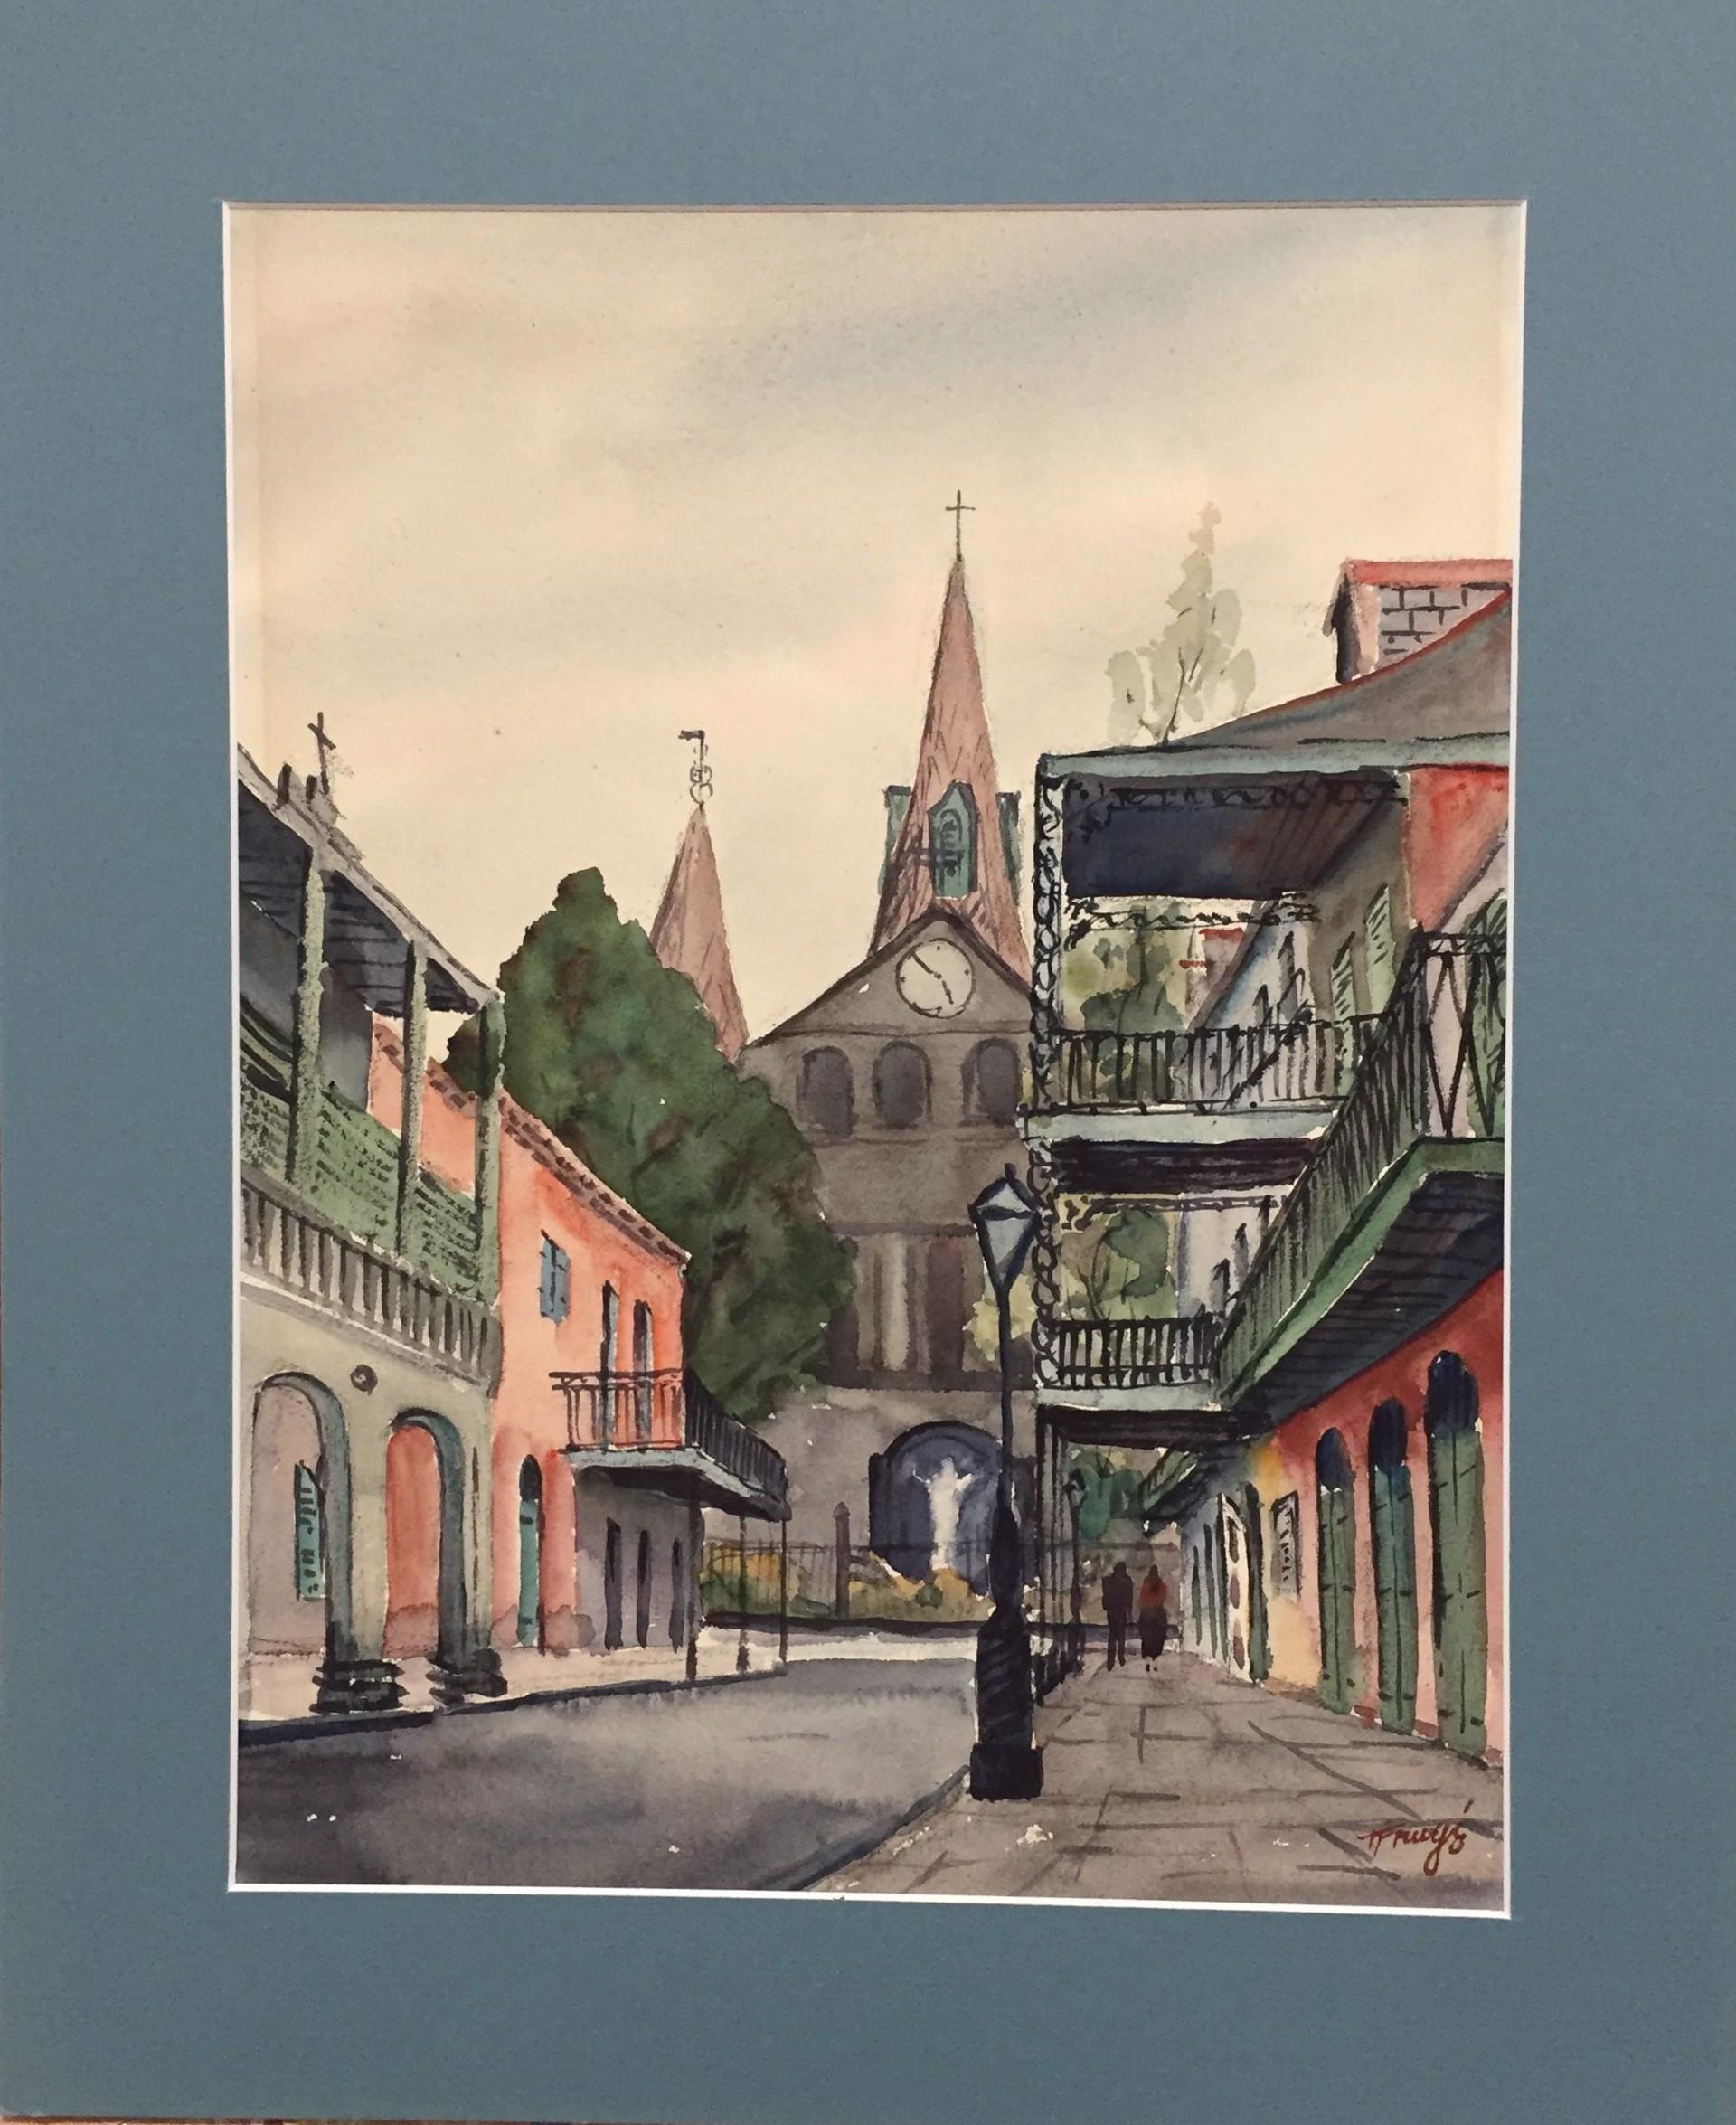 French Quarter Scene (Behind St. Louis Cathedral - New Orleans Painting)